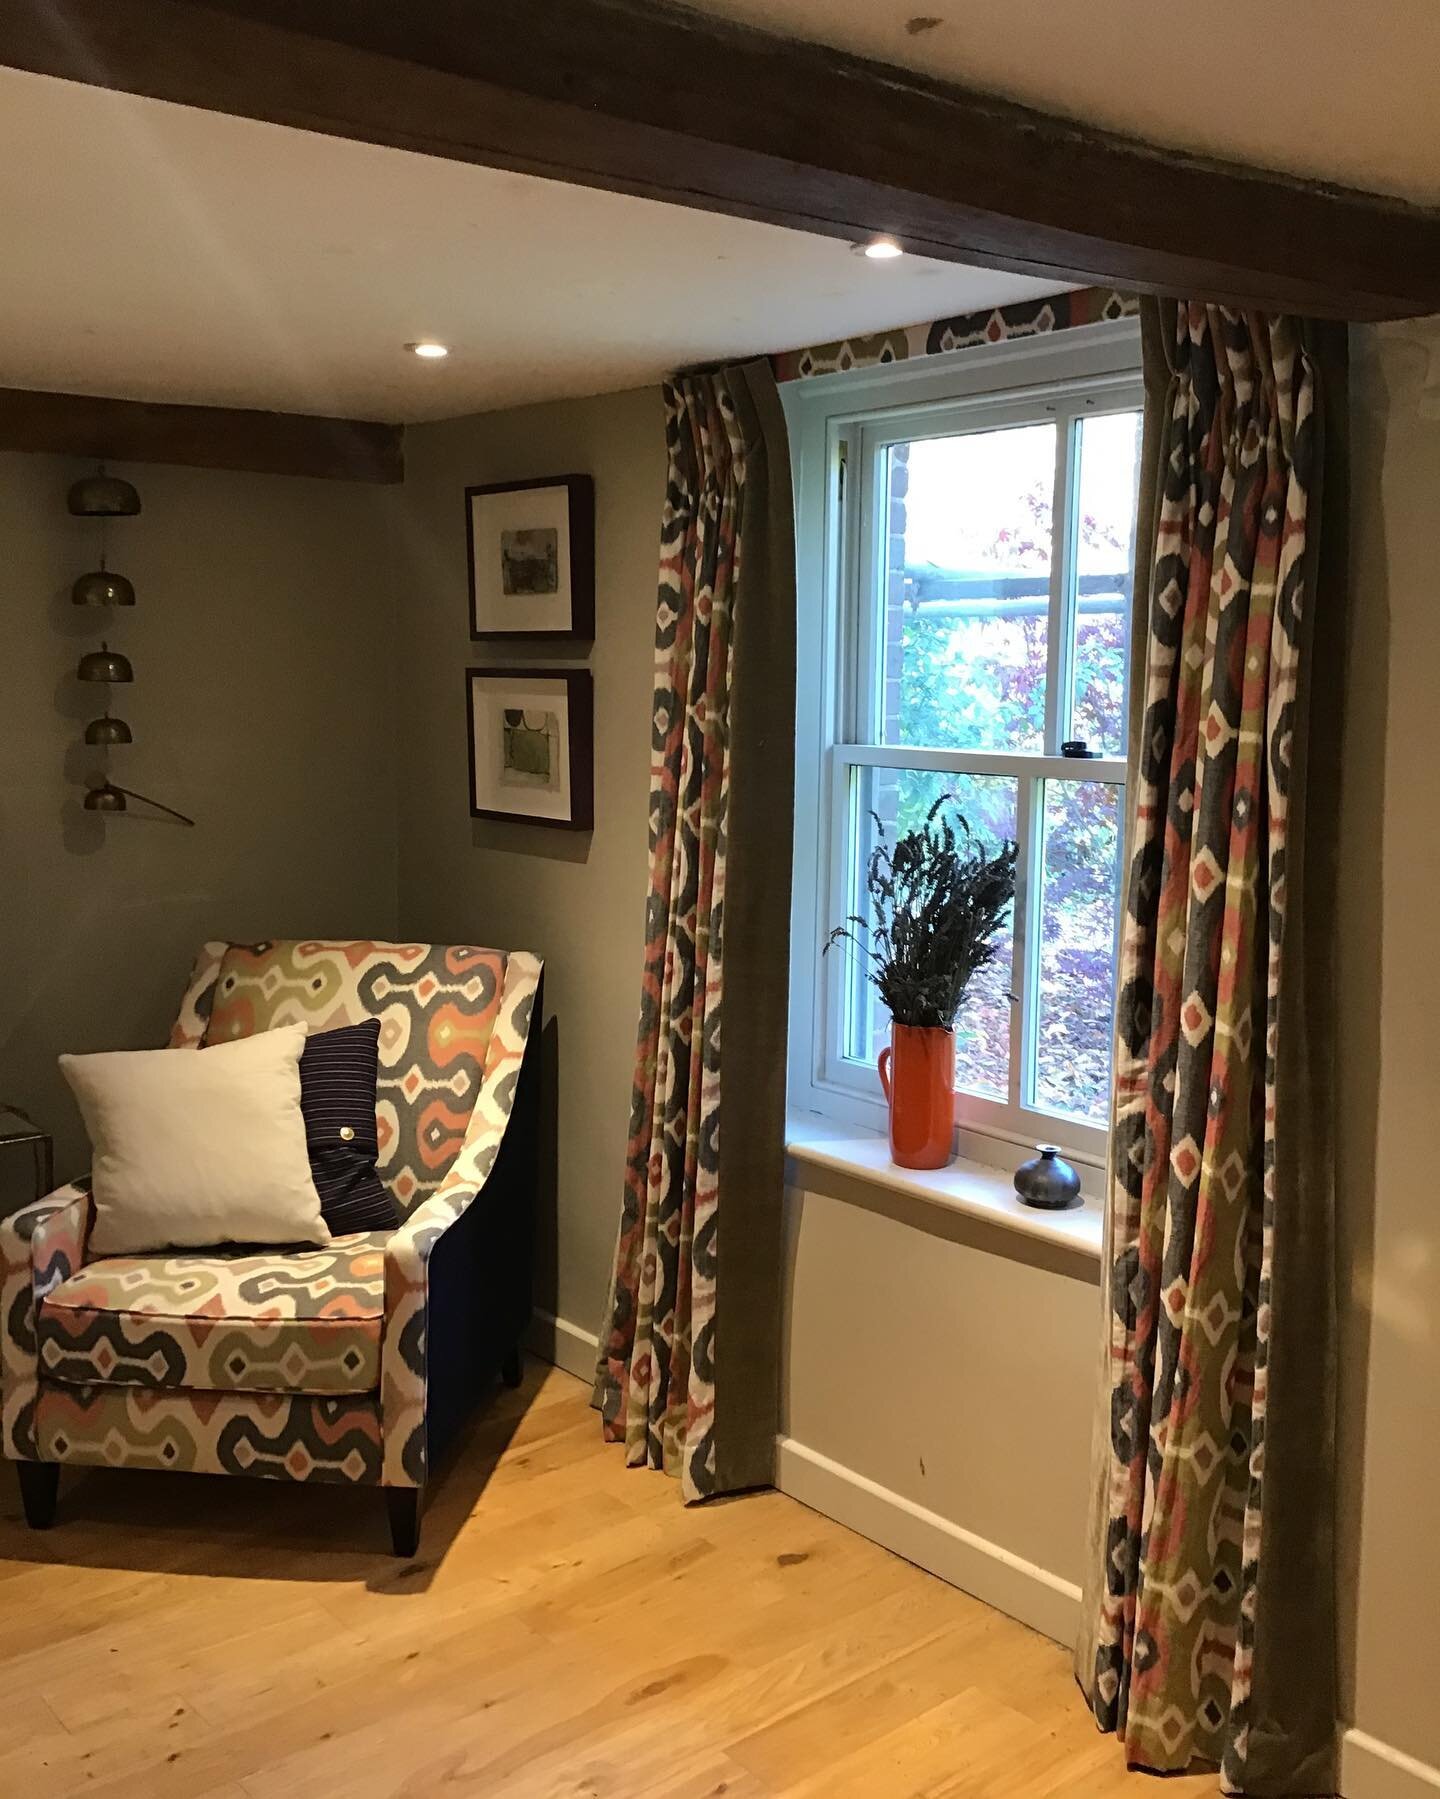 We had a lovely morning hanging all the finished curtains and Roman blinds @nookandcook, especially as we got to have lots of cuddles with Strudel the adorable dachshund puppy. #interiordesign #countryliving #dachshundpuppy #perksofthejob